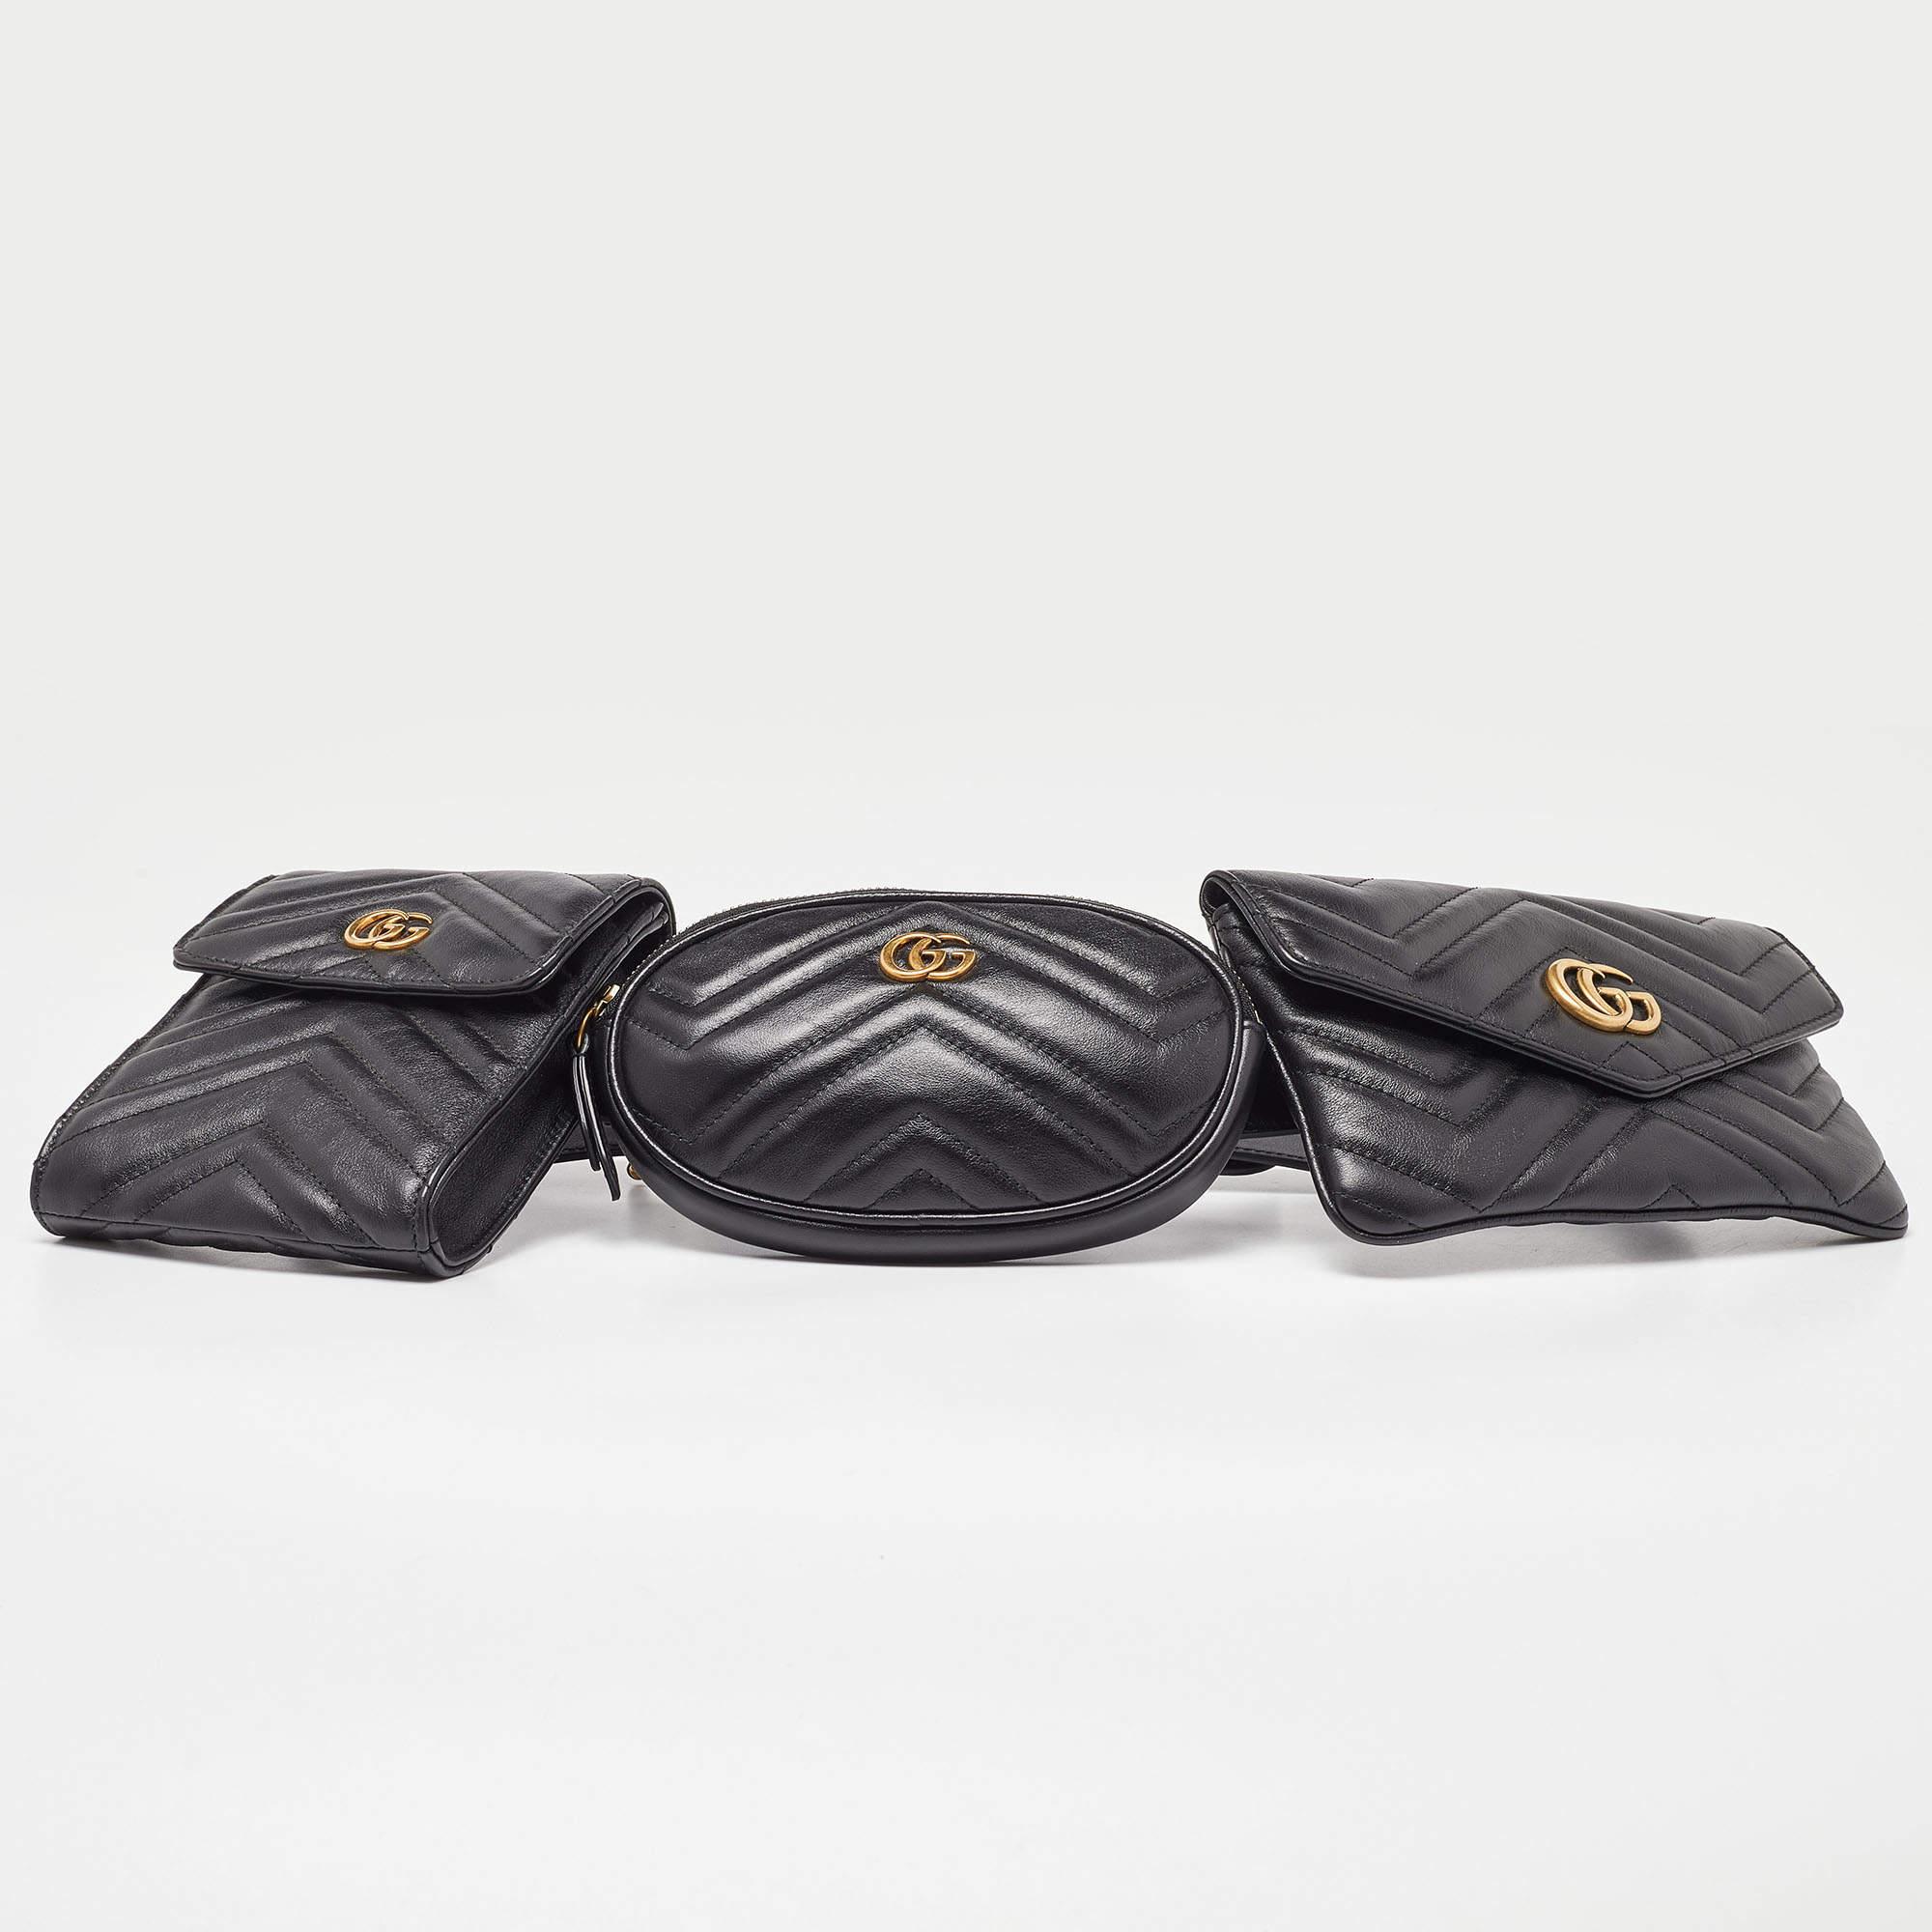 Waist bags are back on trend and we are not disappointed! This one from Gucci is a fine choice for you to join the trend. Made from Matelassé leather, the black triple belt bag comes with gold-tone hardware.

Height: 12cm / 15cm / 11cm